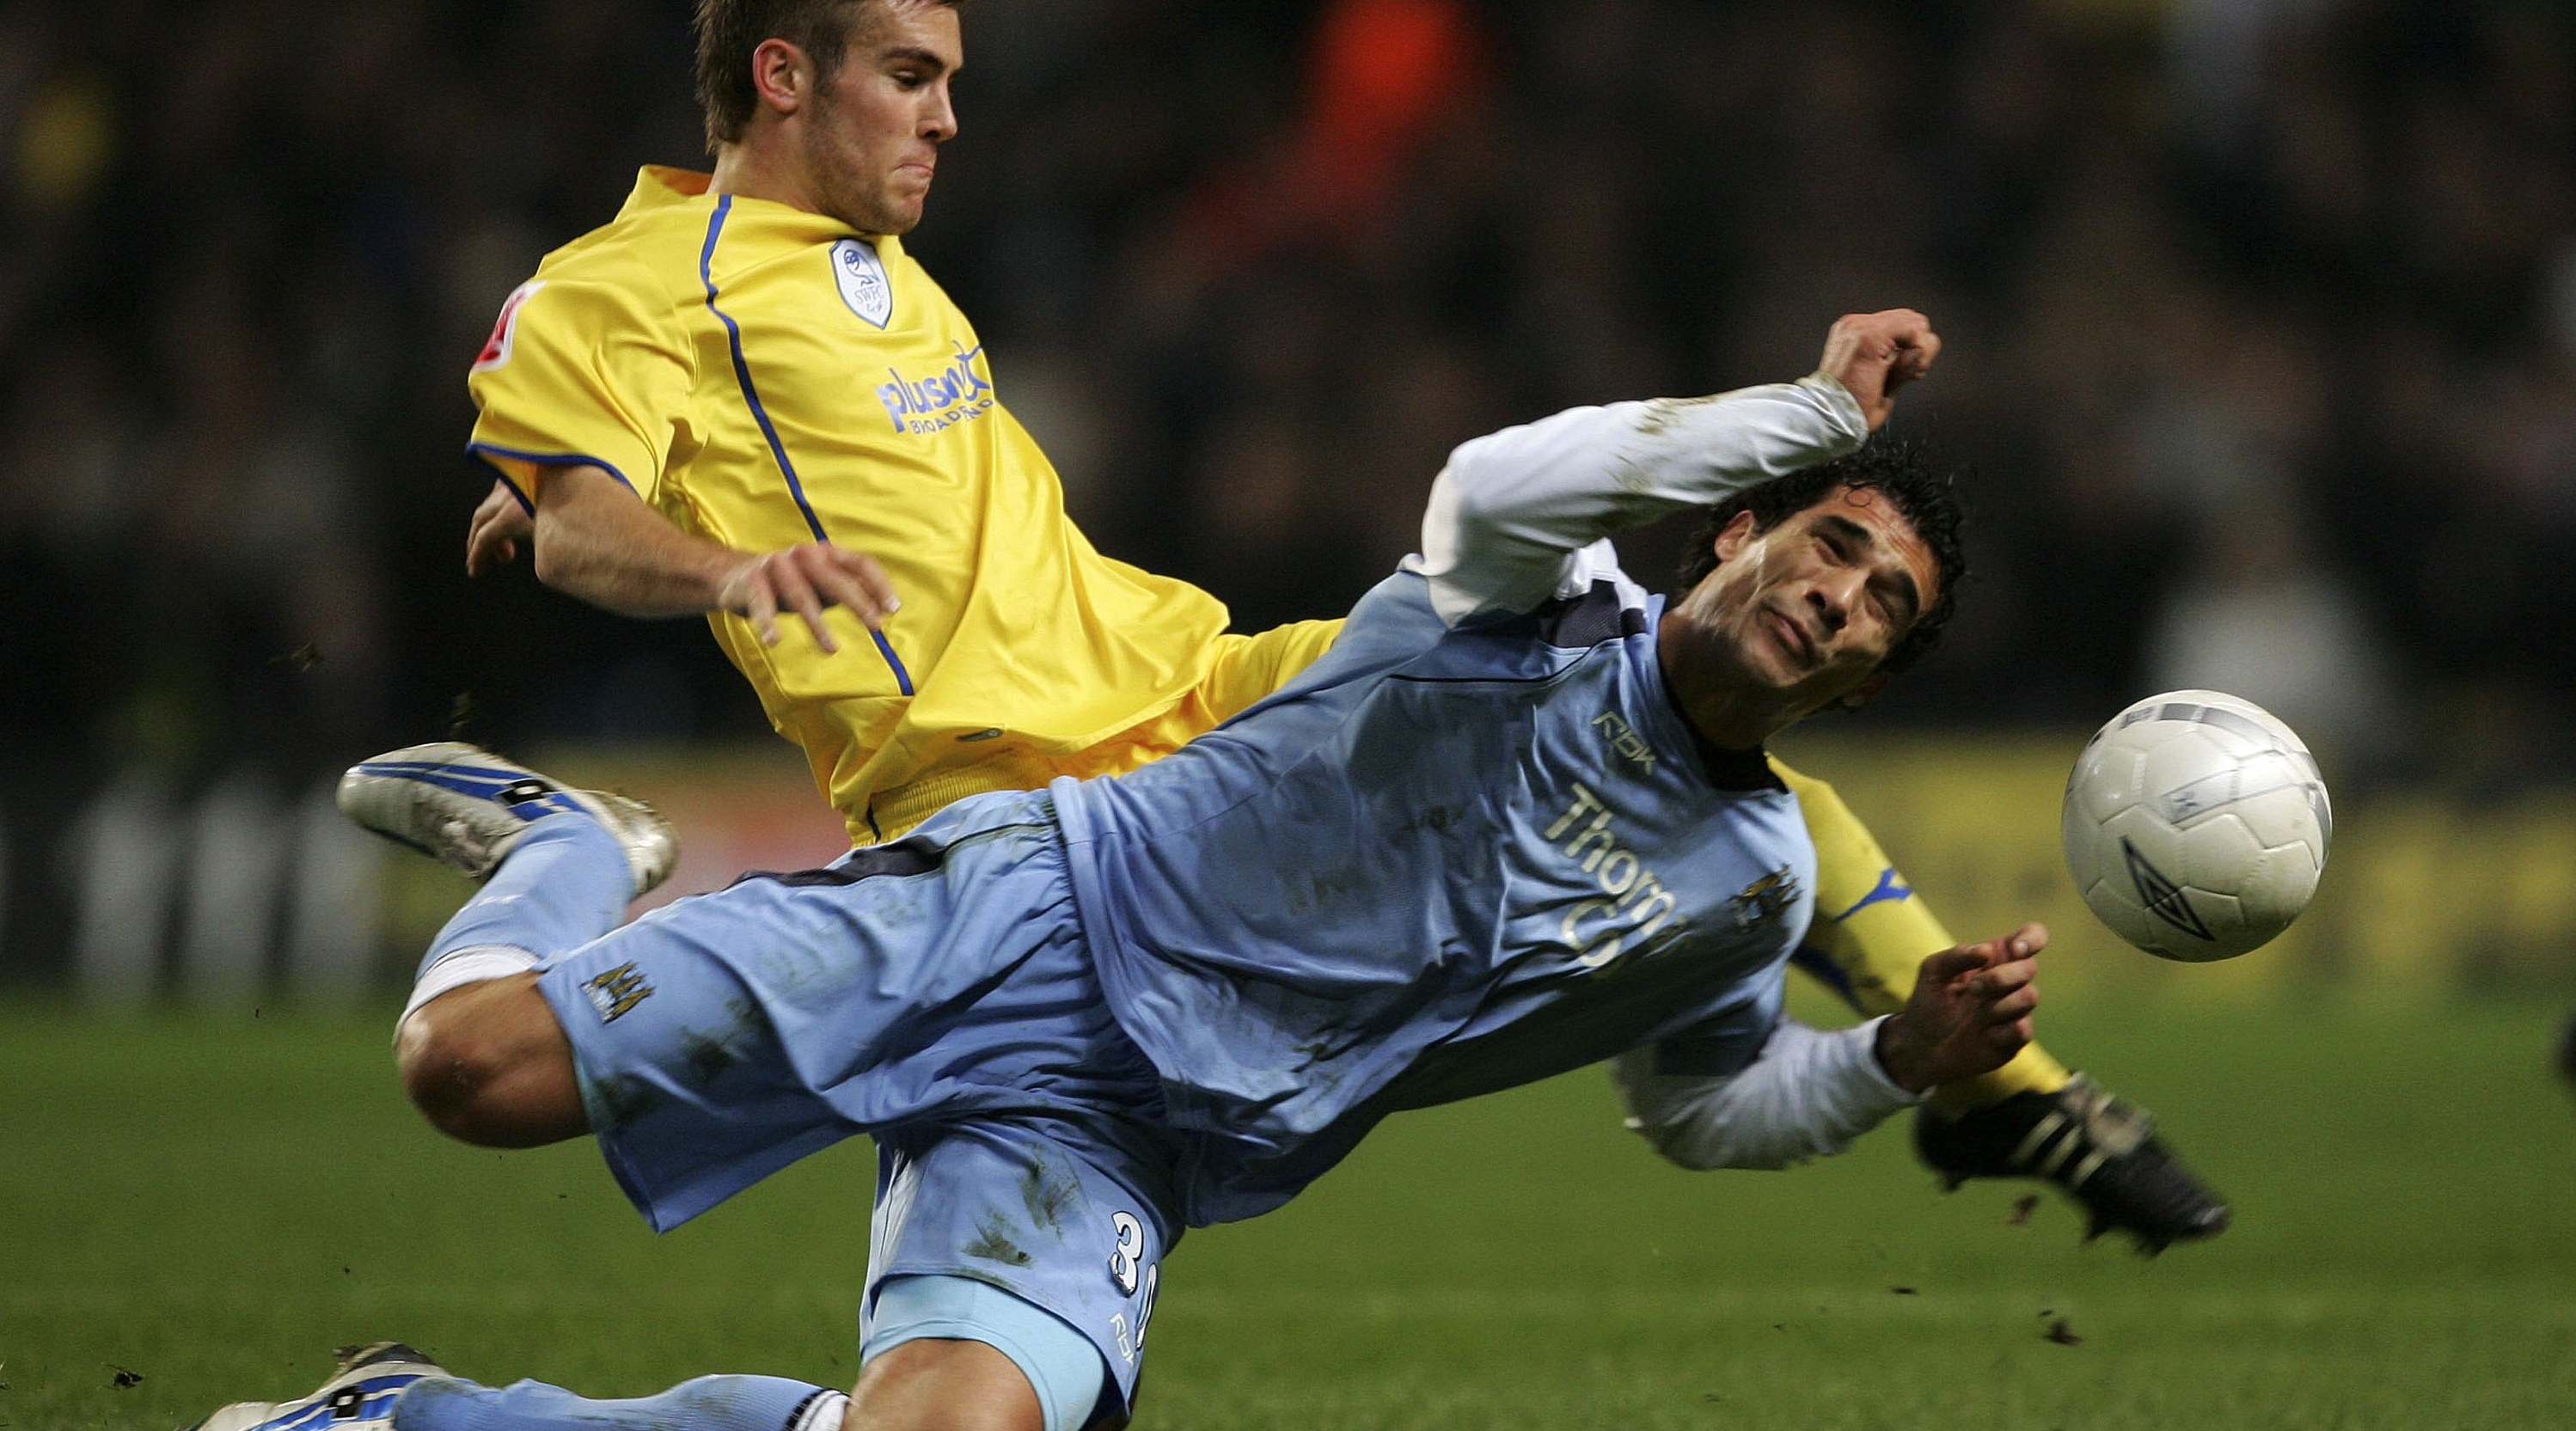 MANCHESTER, UNITED KINGDOM - JANUARY 16; Bernardo Corradi of Manchester City and Tommy Spurr of Sheffield Wednesday in action during the FA Cup sponsored by E.ON Third Round Replay match between Manchester City and Sheffield Wednesday at the City of Manchester Stadium on January 16, 2007 in Manchester, England. (Photo bGary Prior/Getty Images)